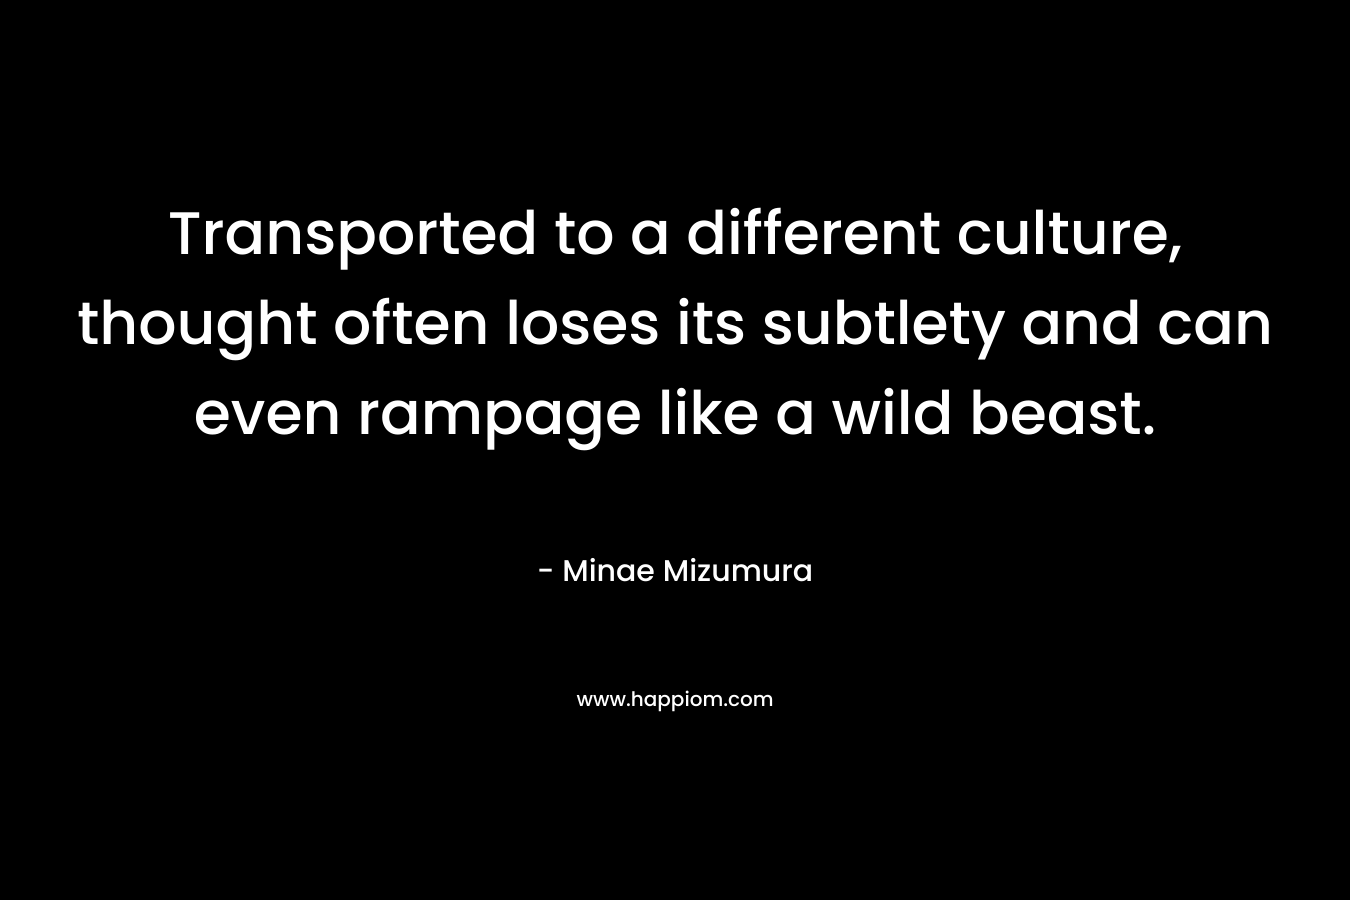 Transported to a different culture, thought often loses its subtlety and can even rampage like a wild beast. – Minae Mizumura